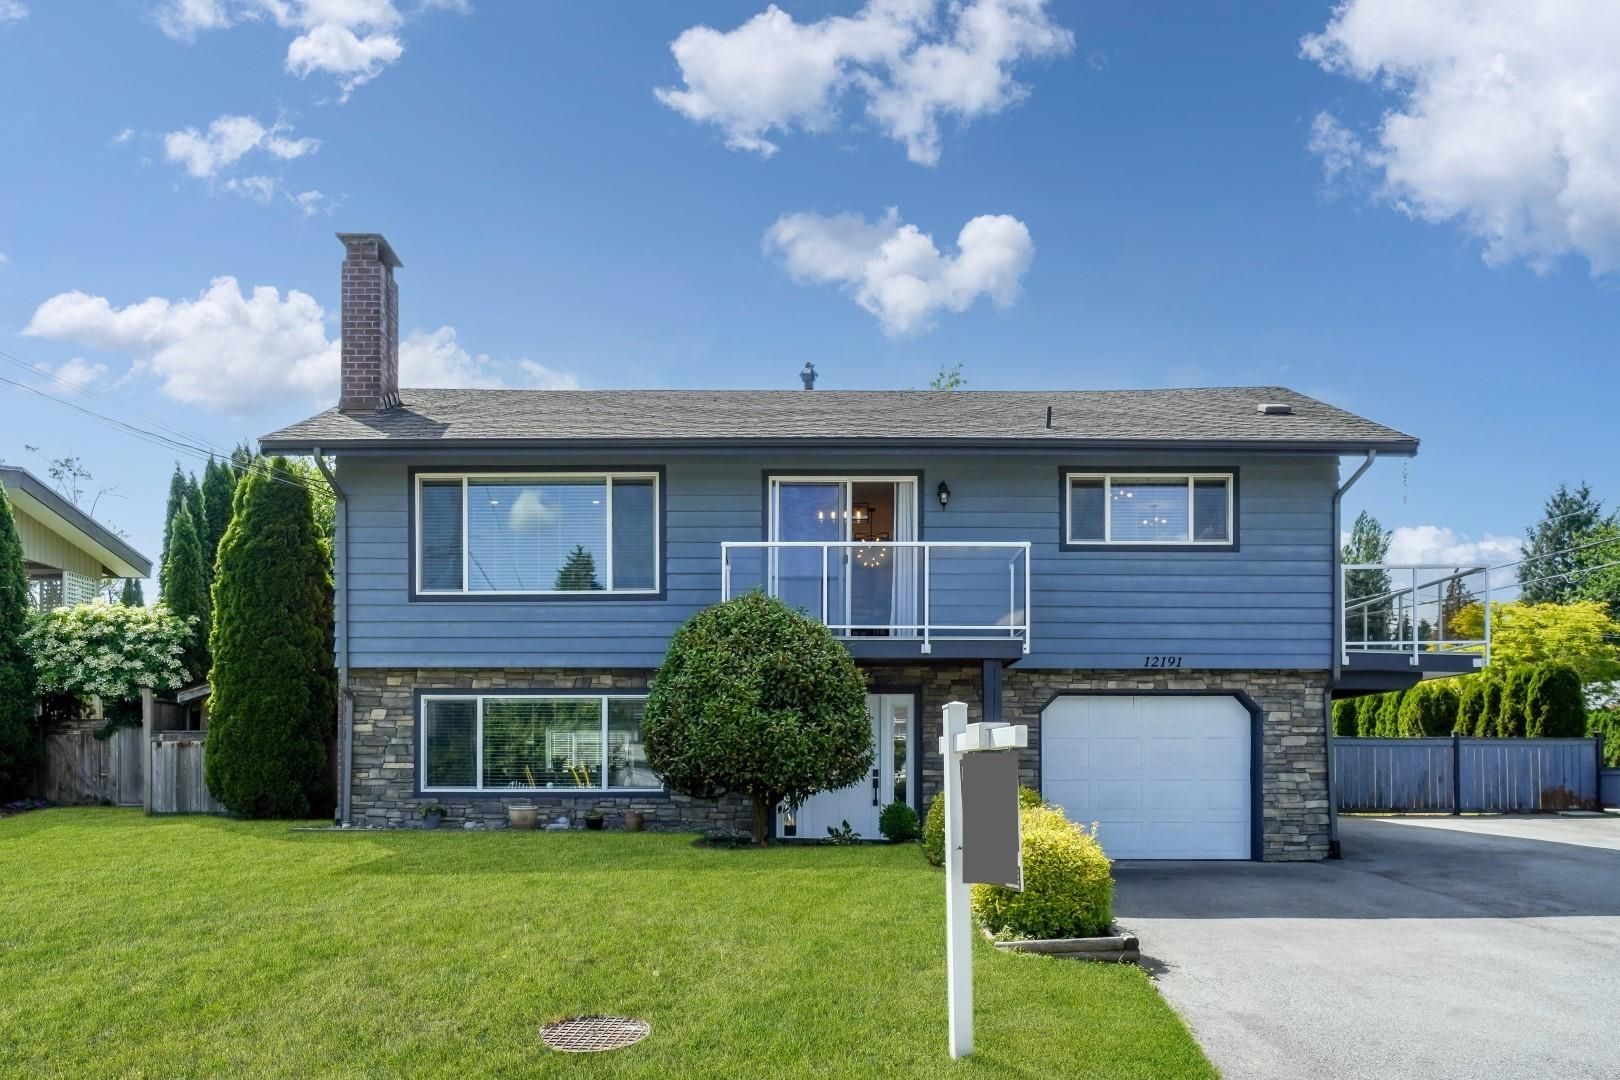 I have sold a property at 12191 DUNBAR ST in Maple Ridge
